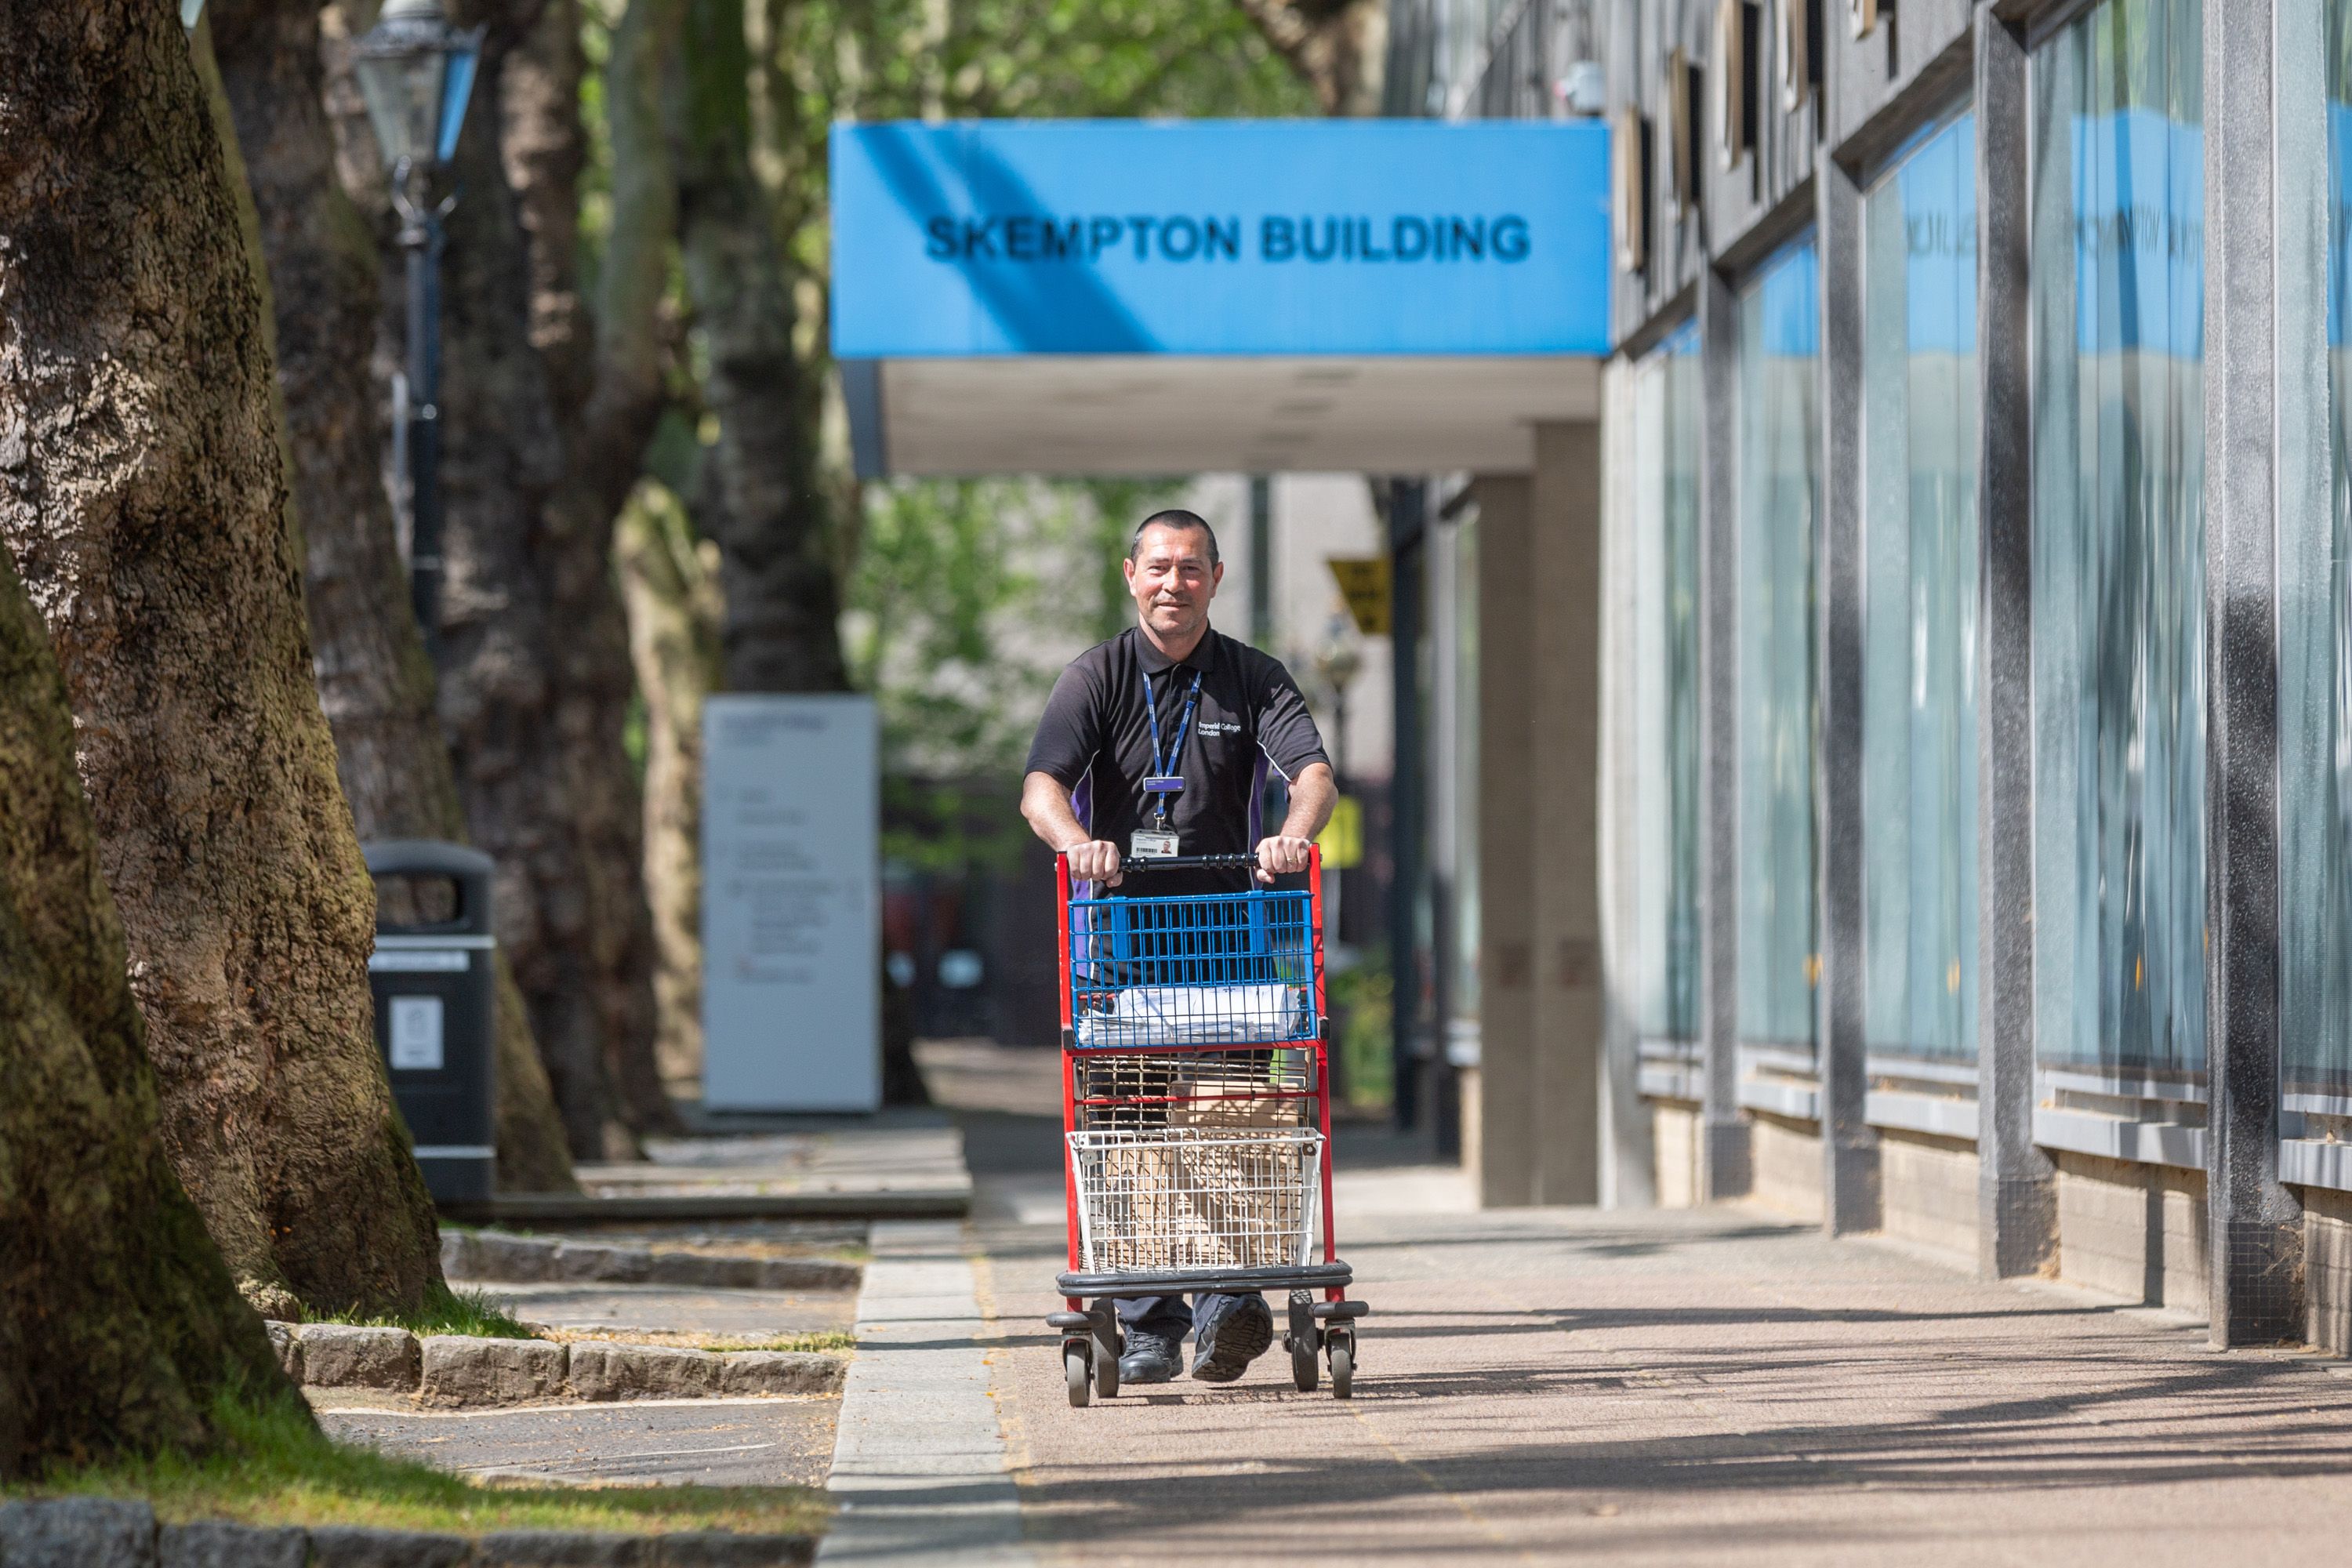 A smiling man in a blue Imperial shirt wheels a post trolley outside the Skempton Building